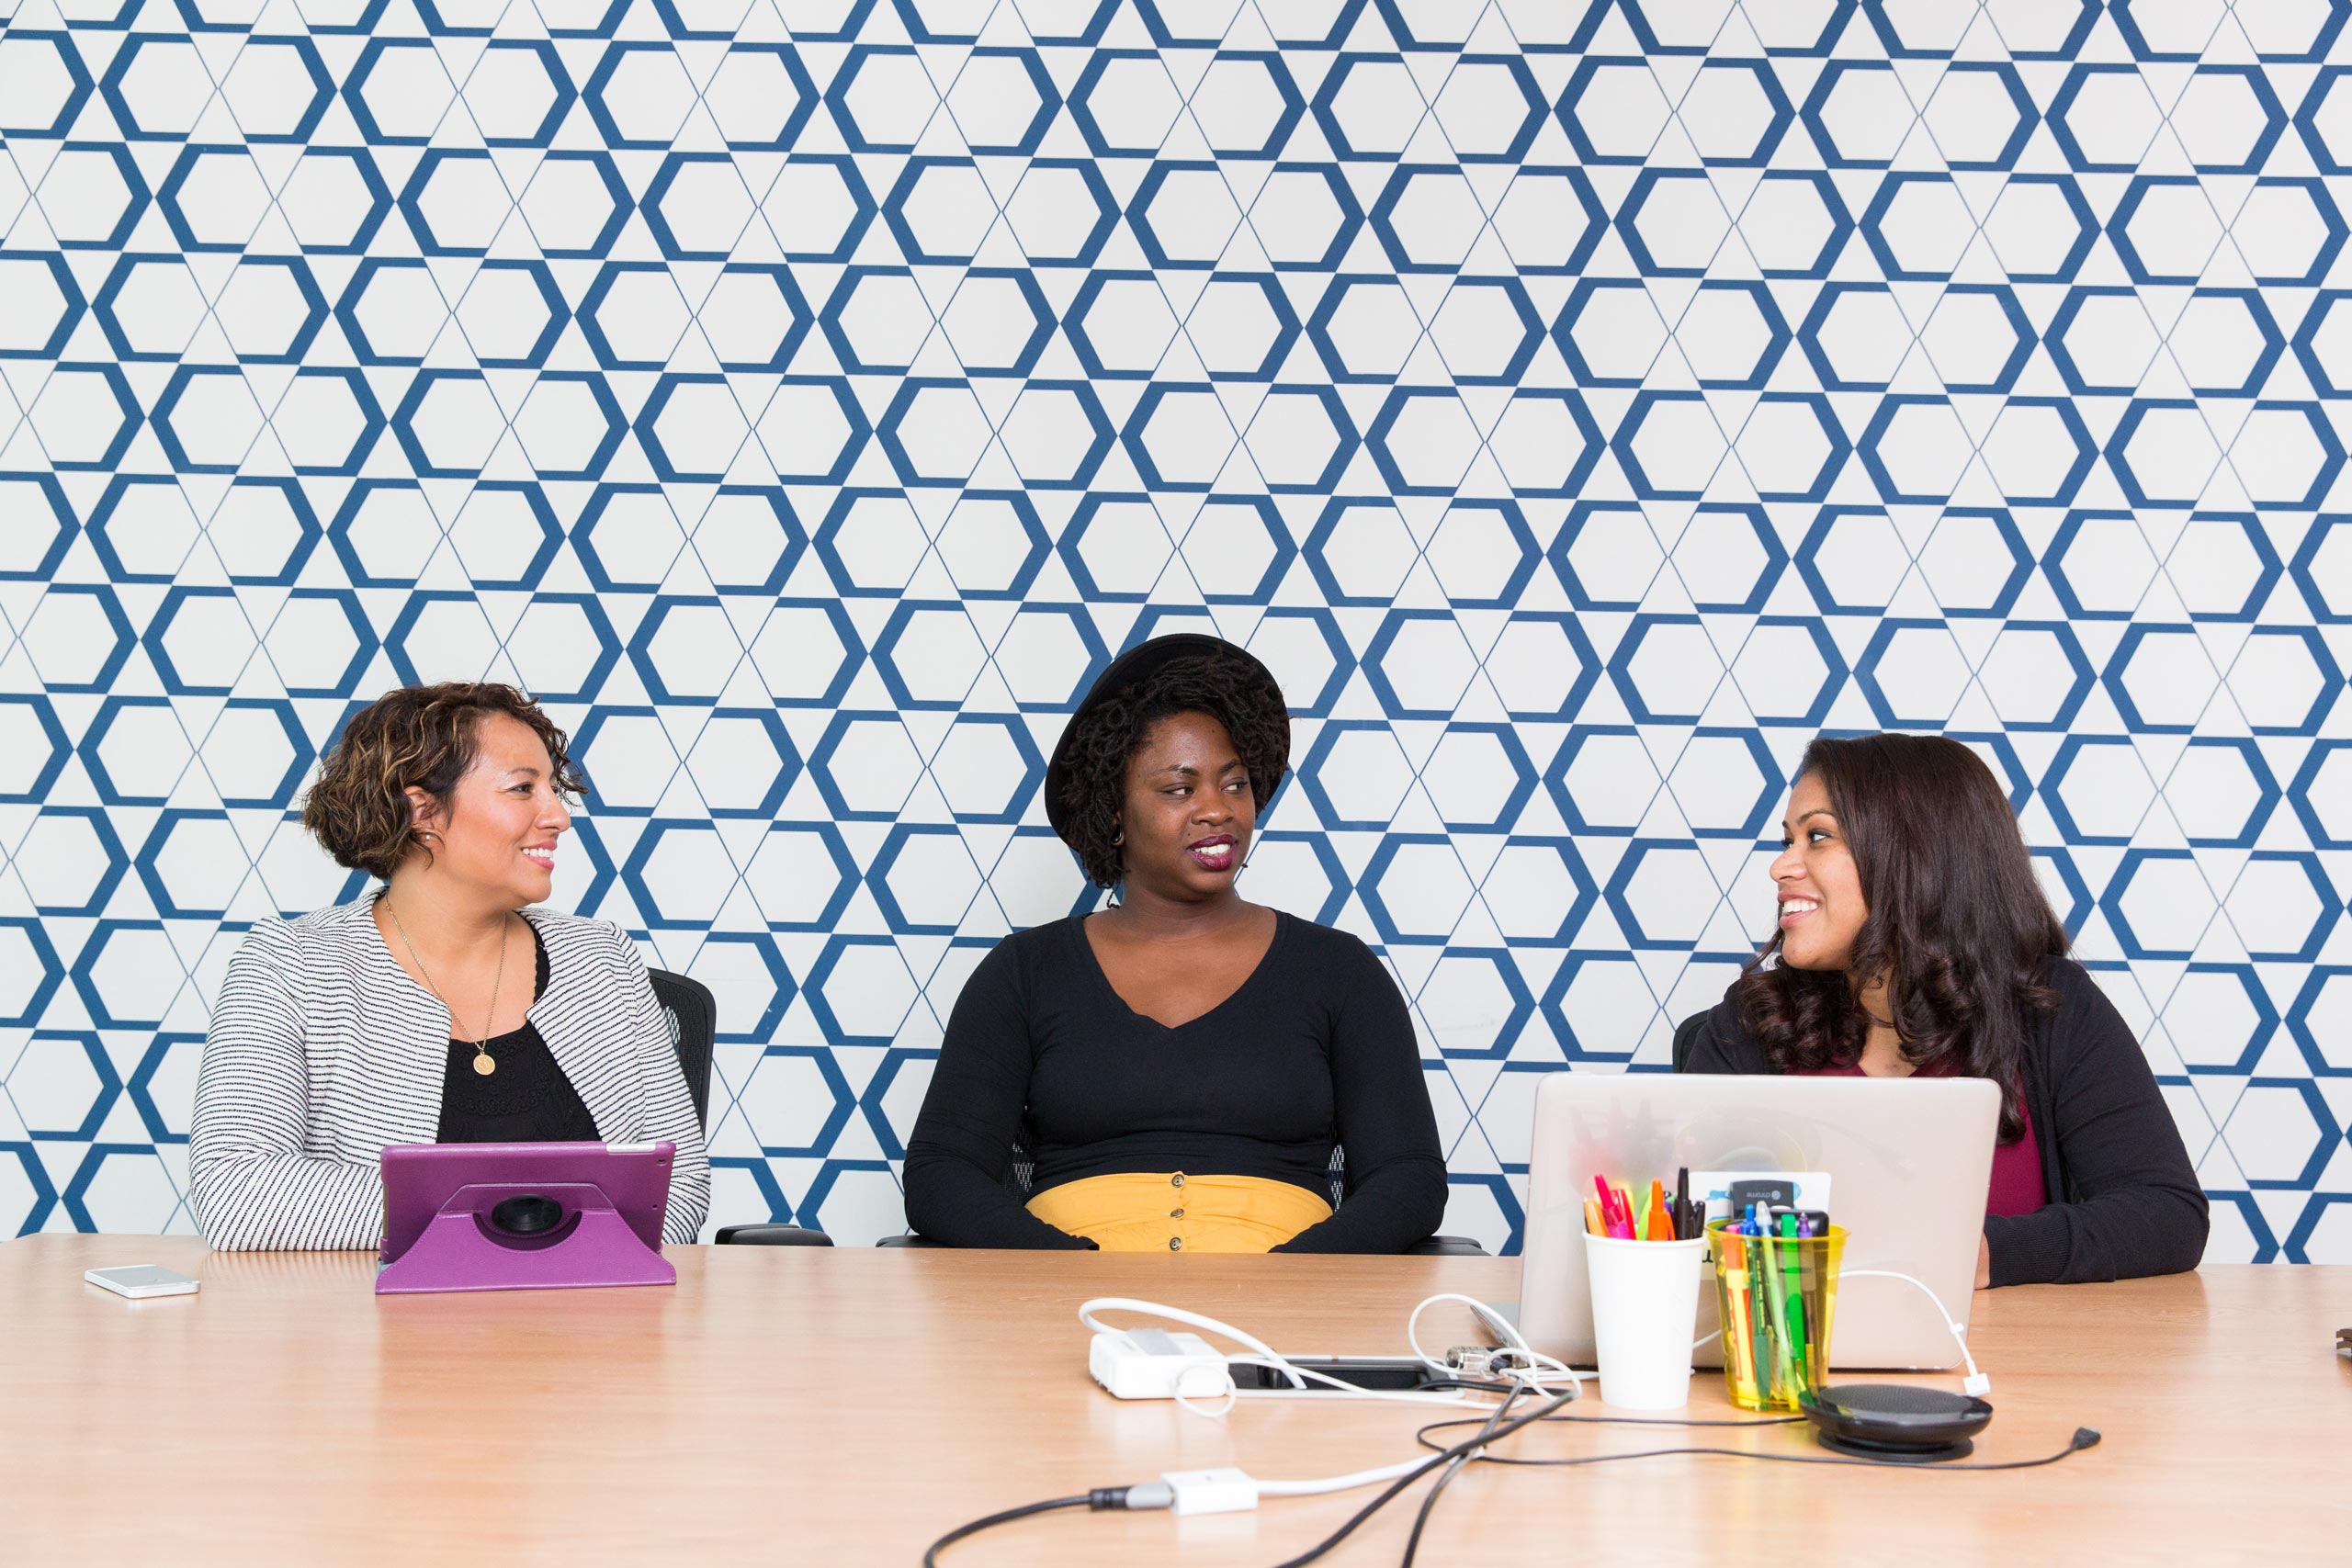 3 women consulting with each other professionally with laptops and ipads on the table in front of a blue patterned tile background